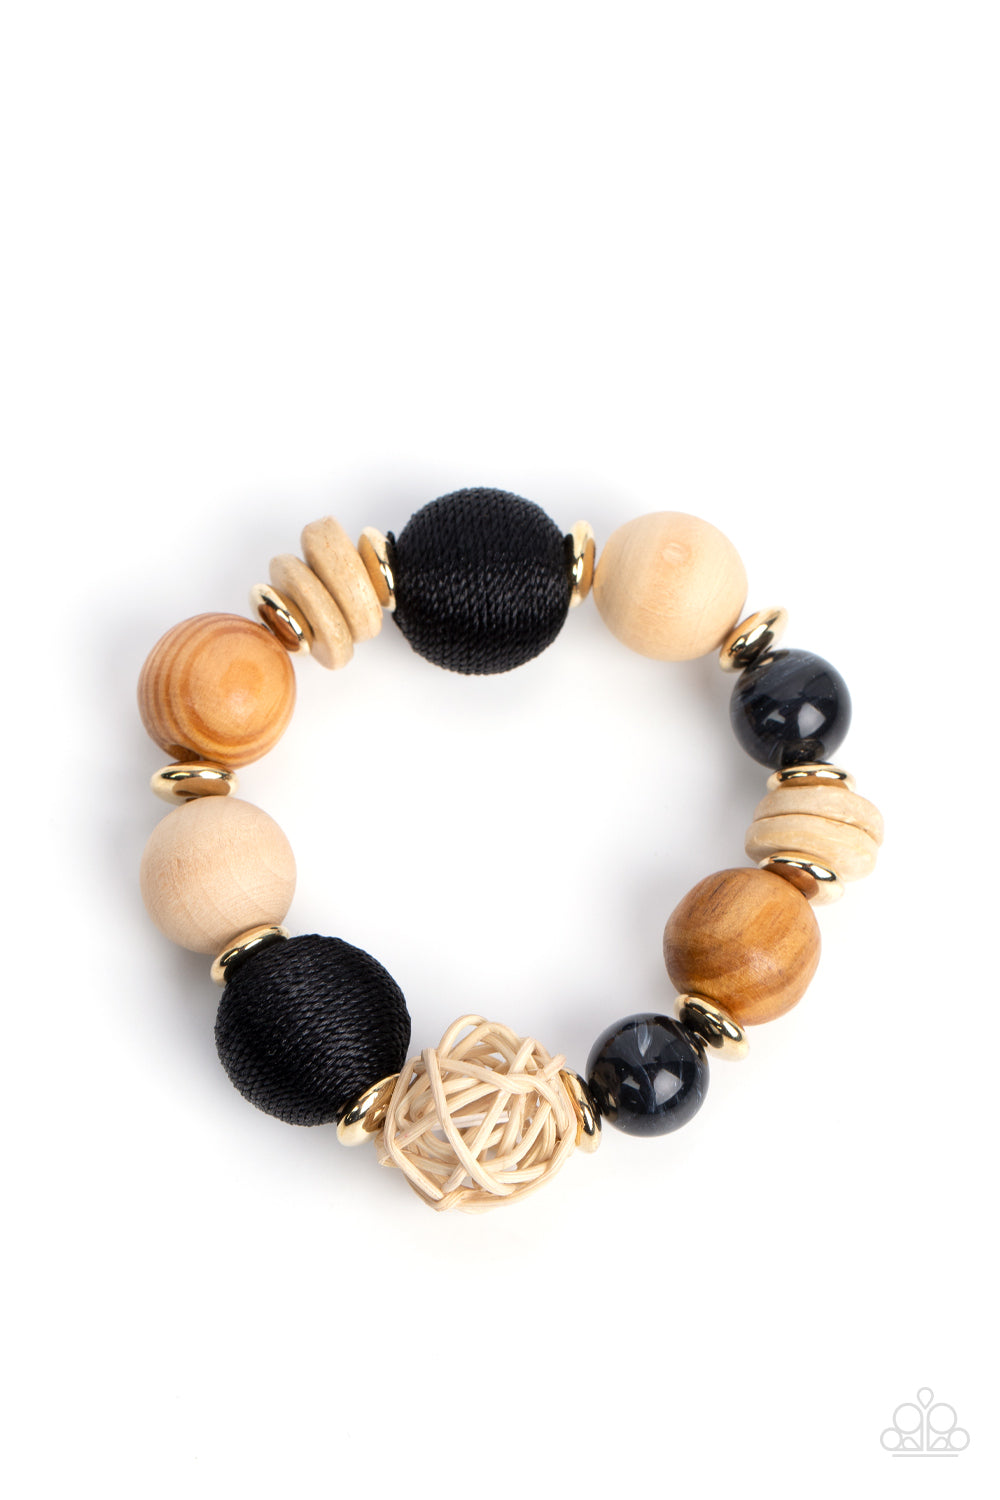 Happily Homespun Black Bracelet - Paparazzi Accessories  Infused with a single rattan sphere, a mismatched collection of oversized wooden beads, black thread wrapped beads, dainty gold accents, and glassy black beads are threaded along stretchy bands around the wrist for a homespun vibe.  Sold as one individual bracelet.